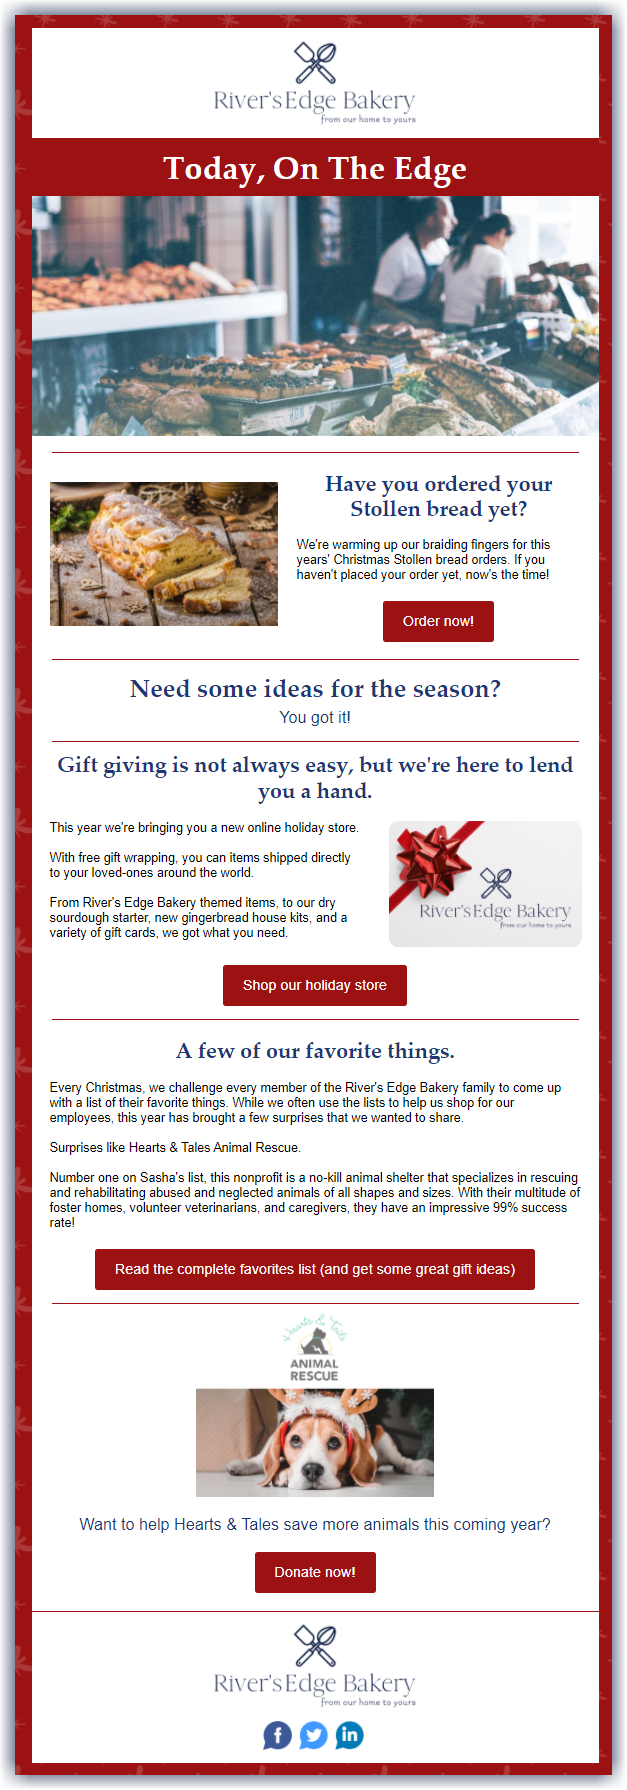 How to Decorate an Email Template for the Holidays